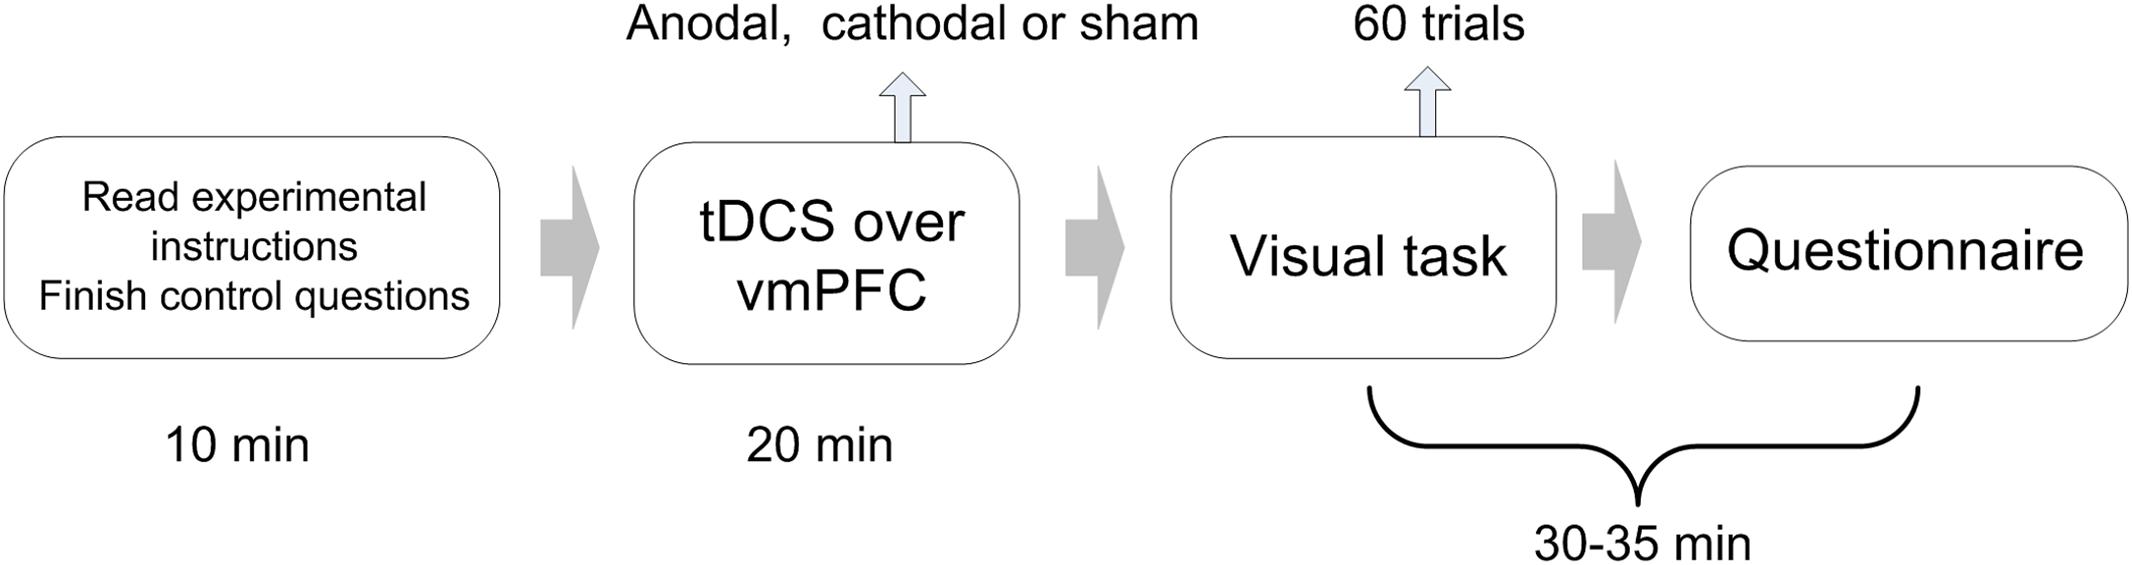 Frontiers Modulating The Activity Of Vmpfc Regulates Informational Social Conformity A Tdcs Study Psychology